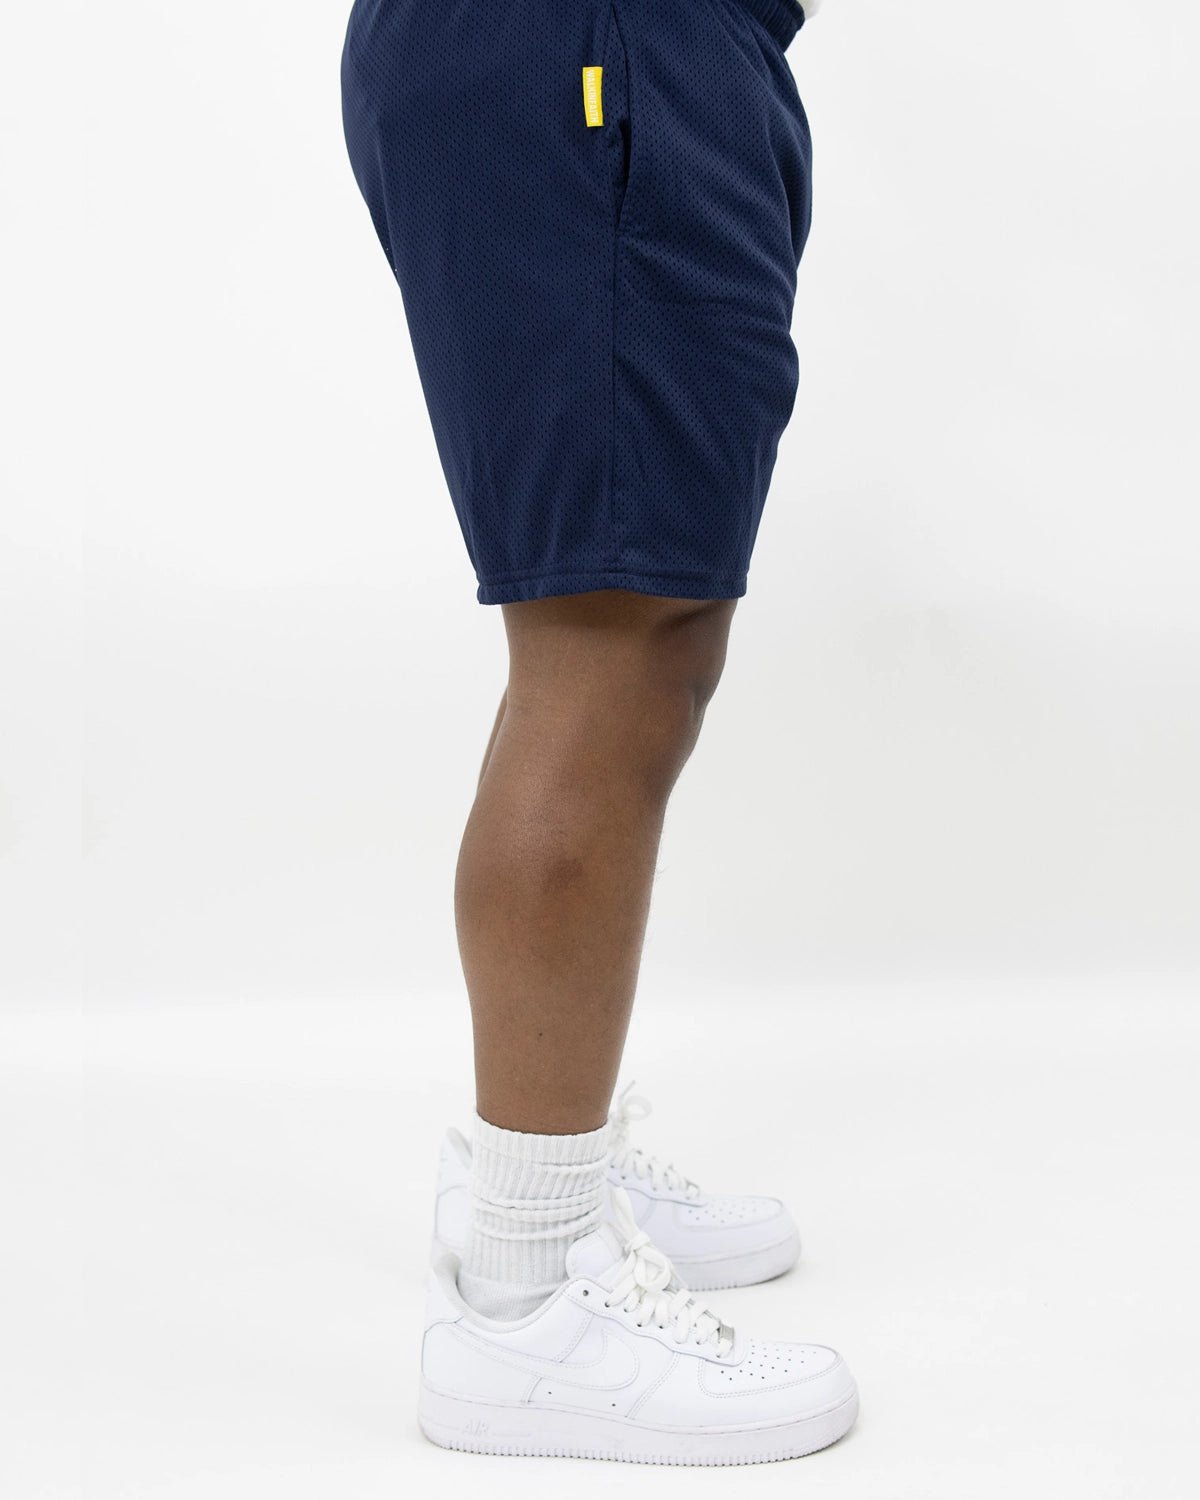 Navy God Is Greater Than The Highs And Lows Unisex Shorts - Walk In Faith Clothing